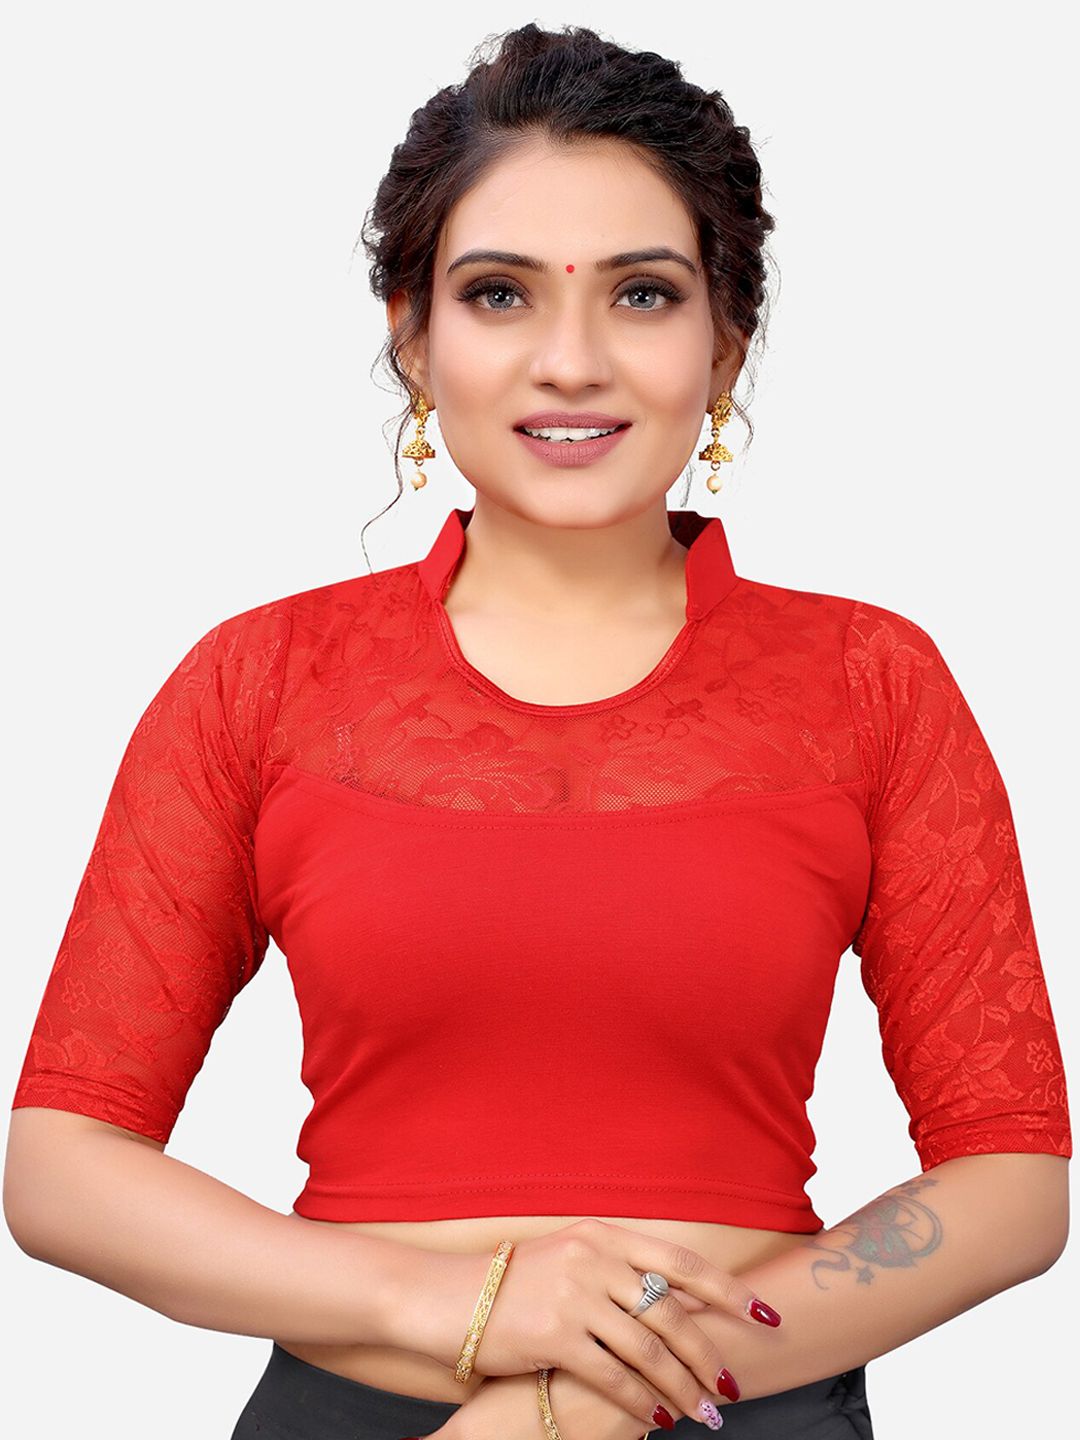 SIRIL Red Woven Design Saree Blouse Price in India